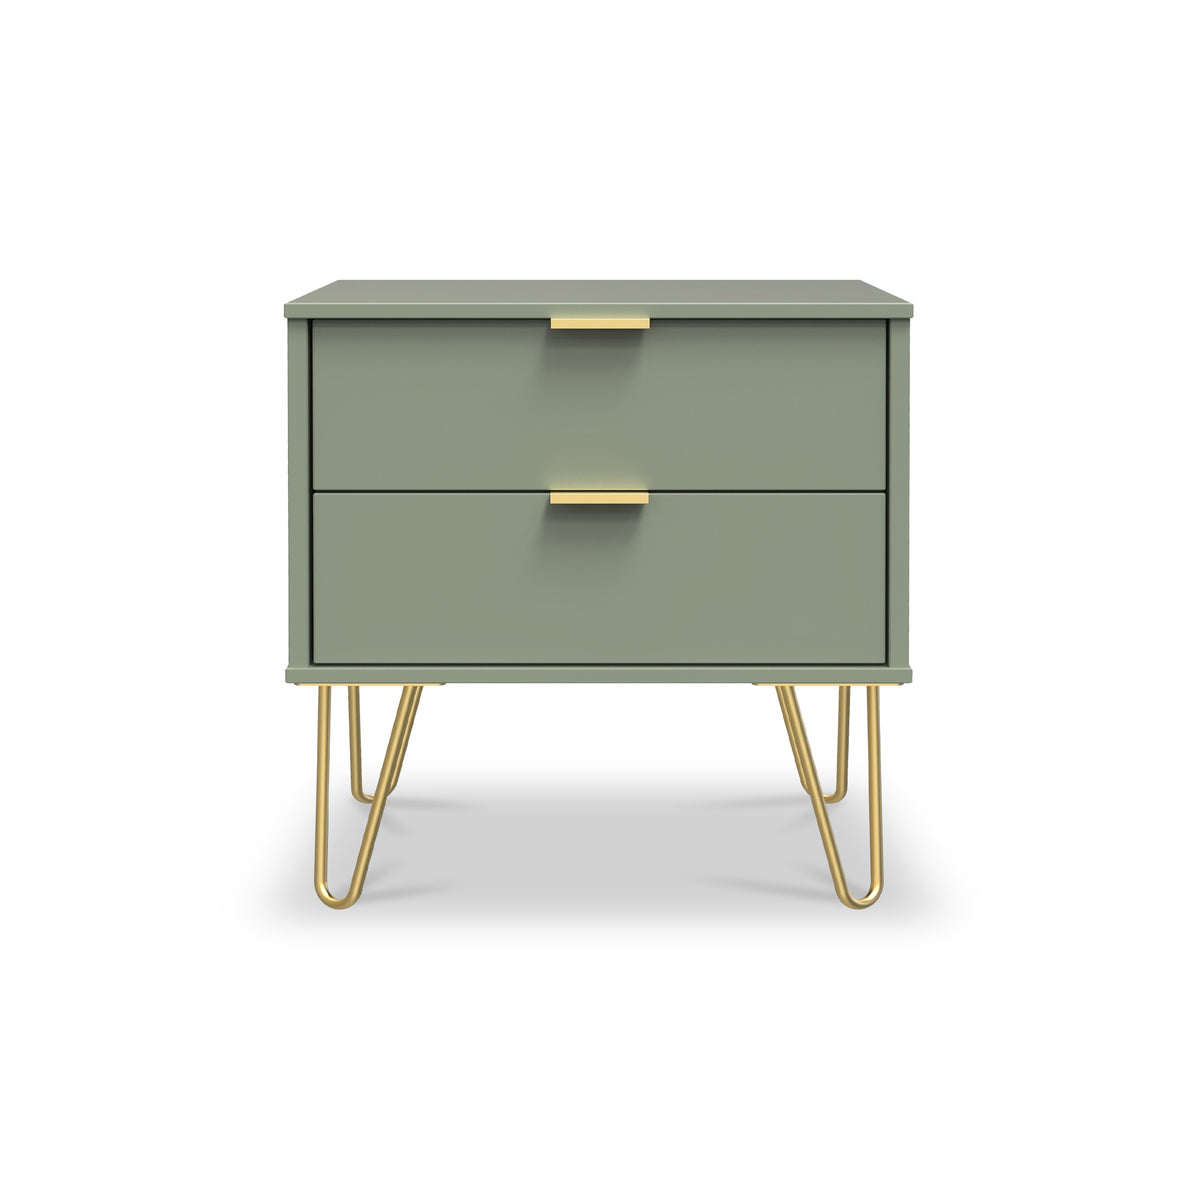 Moreno Olive Green 2 Drawer Sofa Side Lamp Table with Gold Hairpin Legs from Roseland Furniture